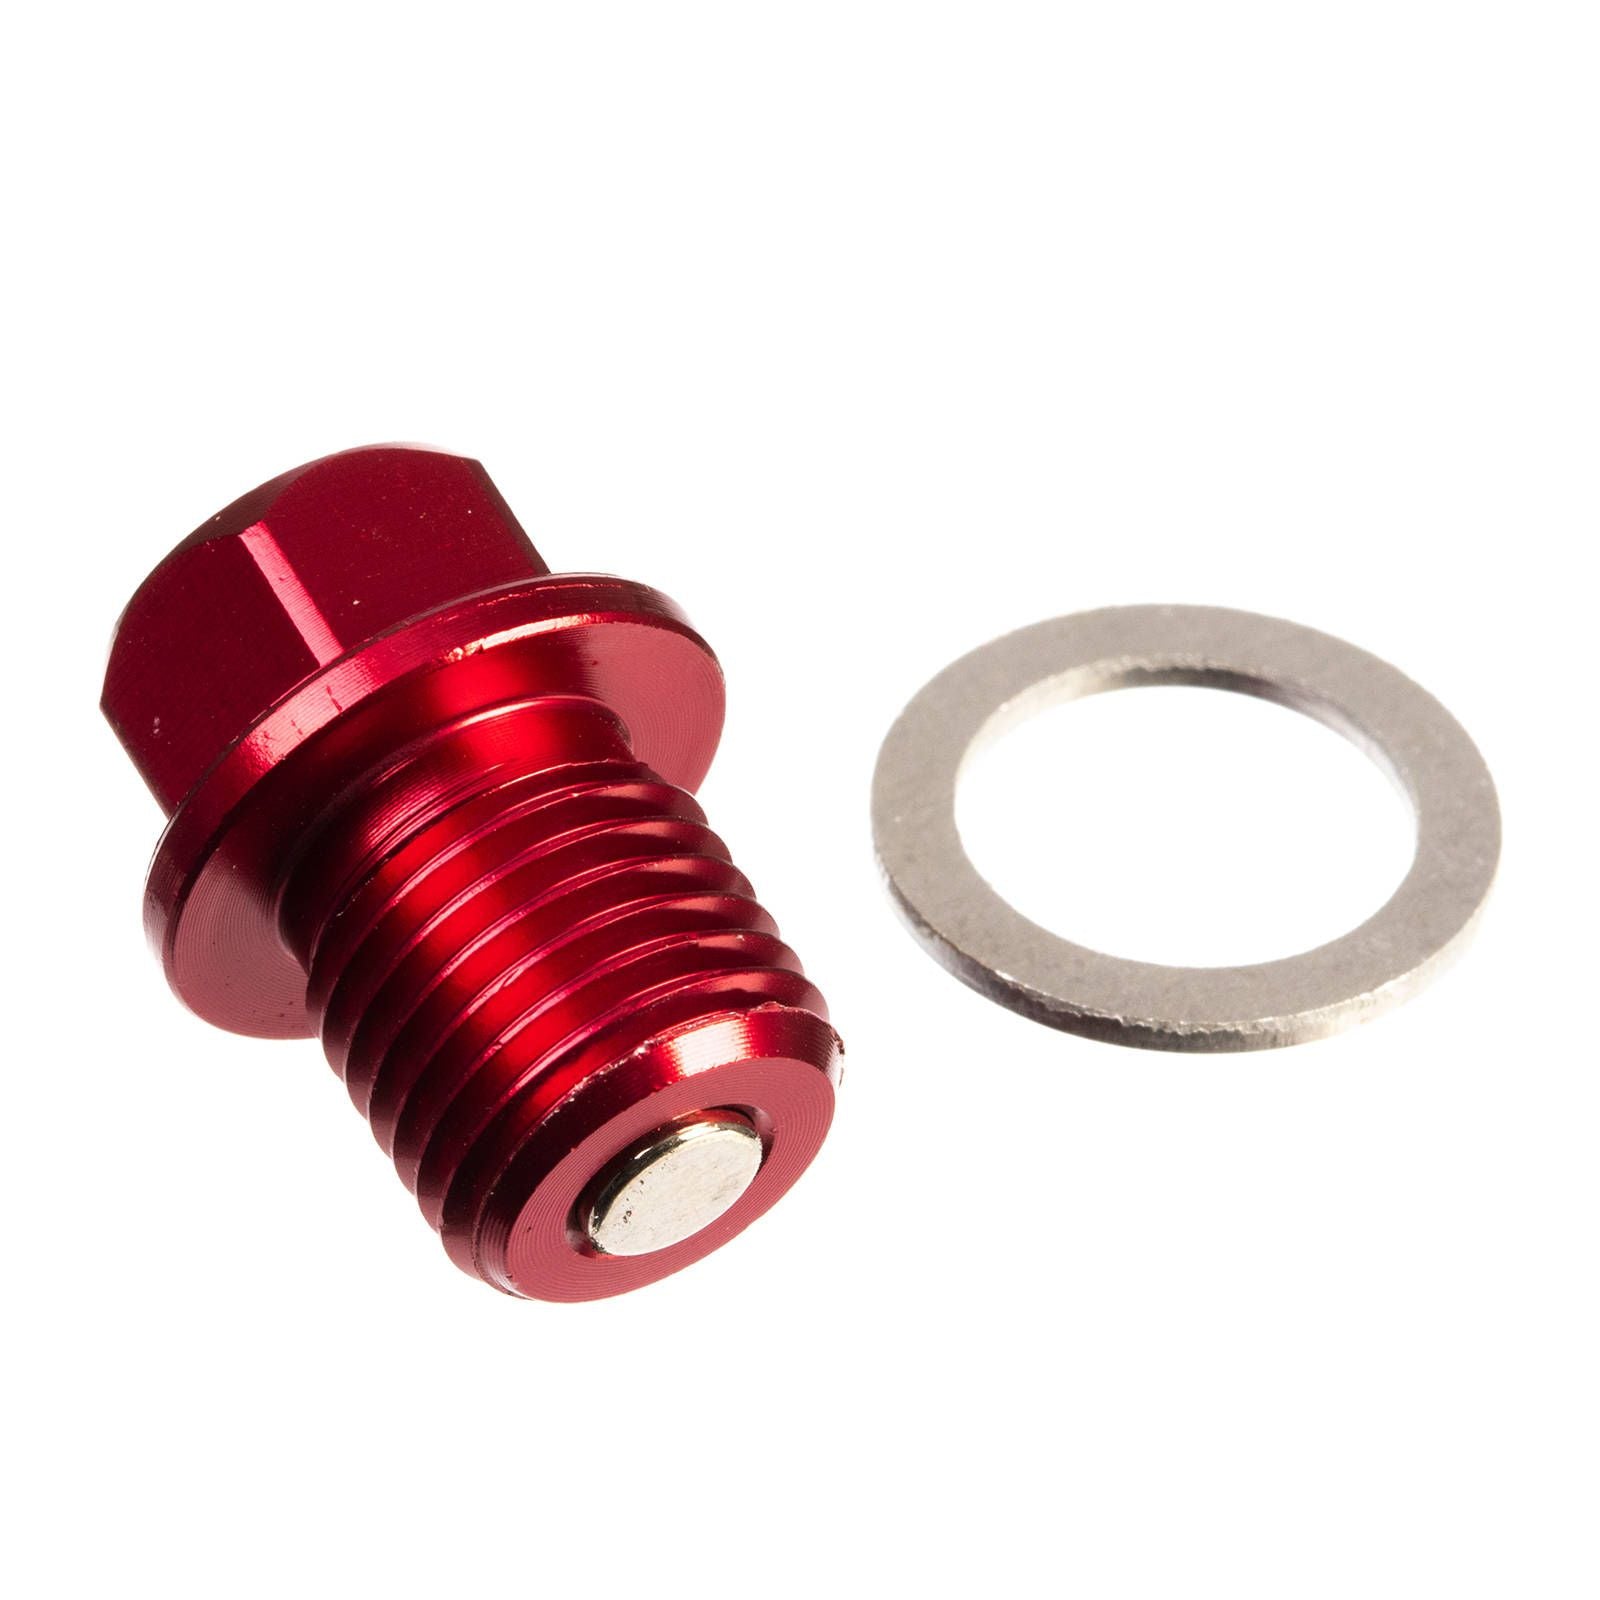 New WHITES Magnetic Sump Plug M14 x 14 x 1.5 - Red #WPMDP141415R